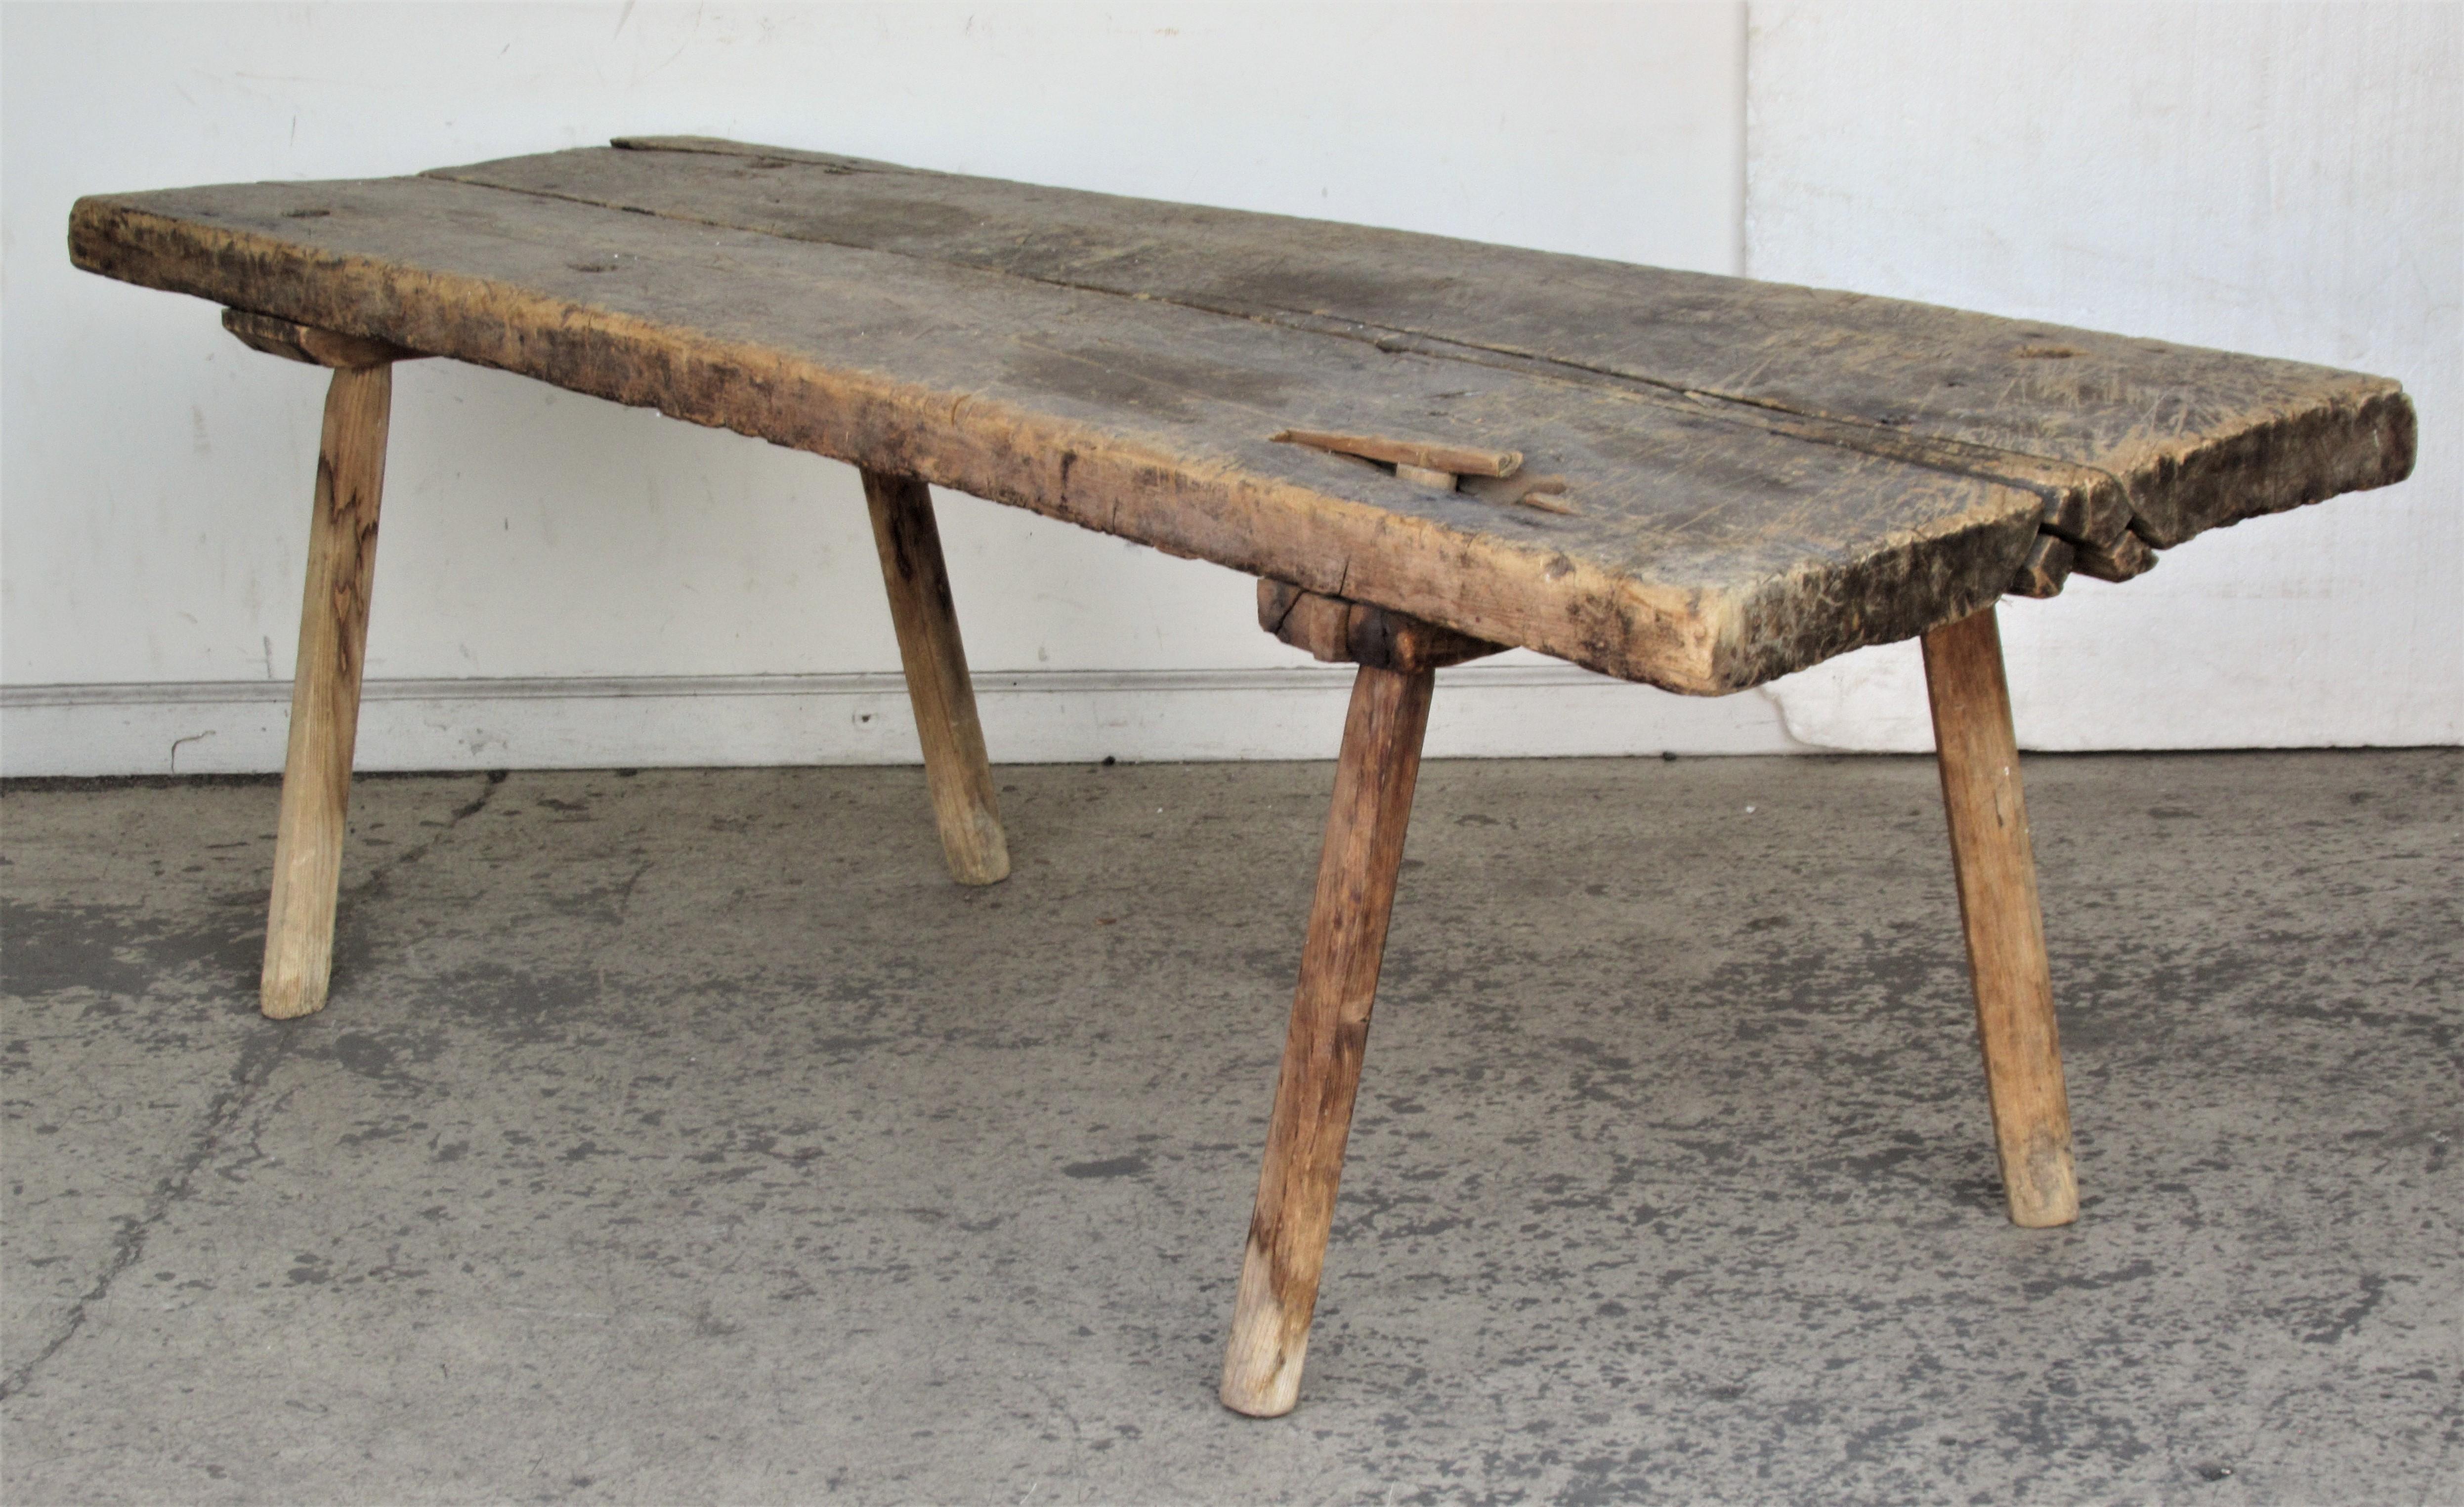 Antique 19th century American primitive butcher's table or bench with four splayed peg legs and a beautifully aged and distressed two board thick slab wood top. Look at all pictures and read condition report in comment section.